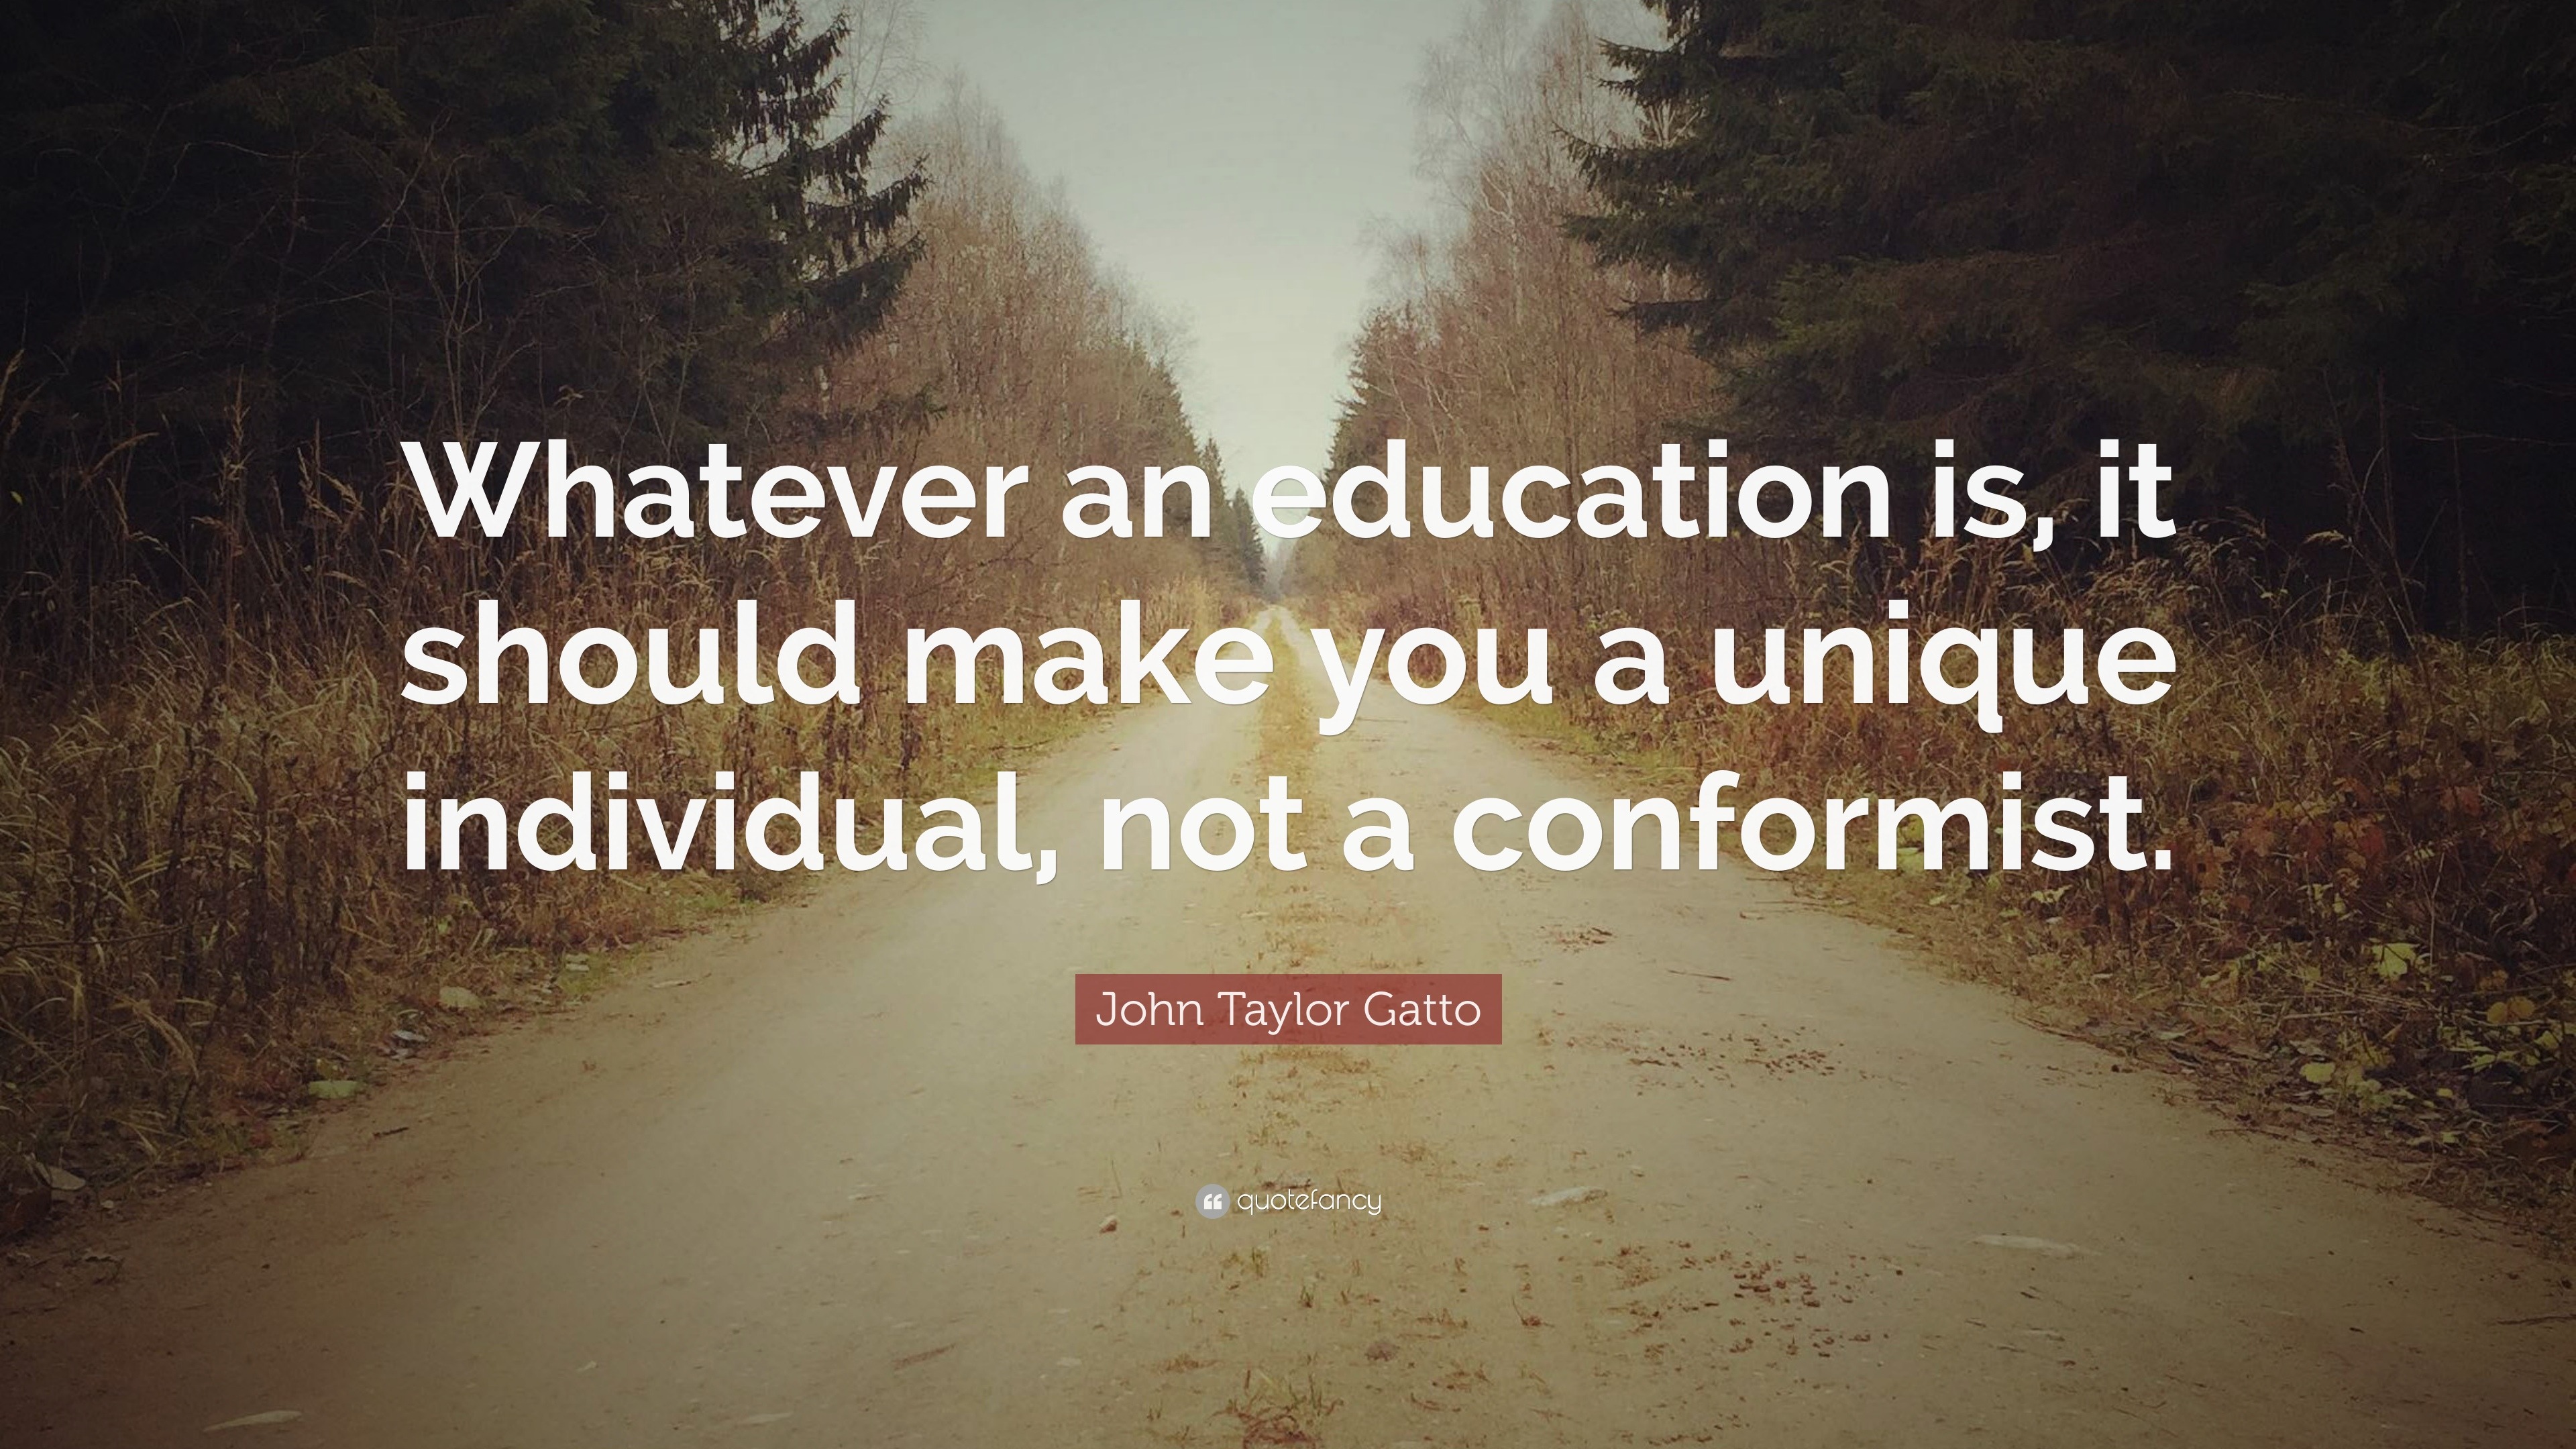 John Taylor Gatto Quote: “Whatever an education is, it should make you ...